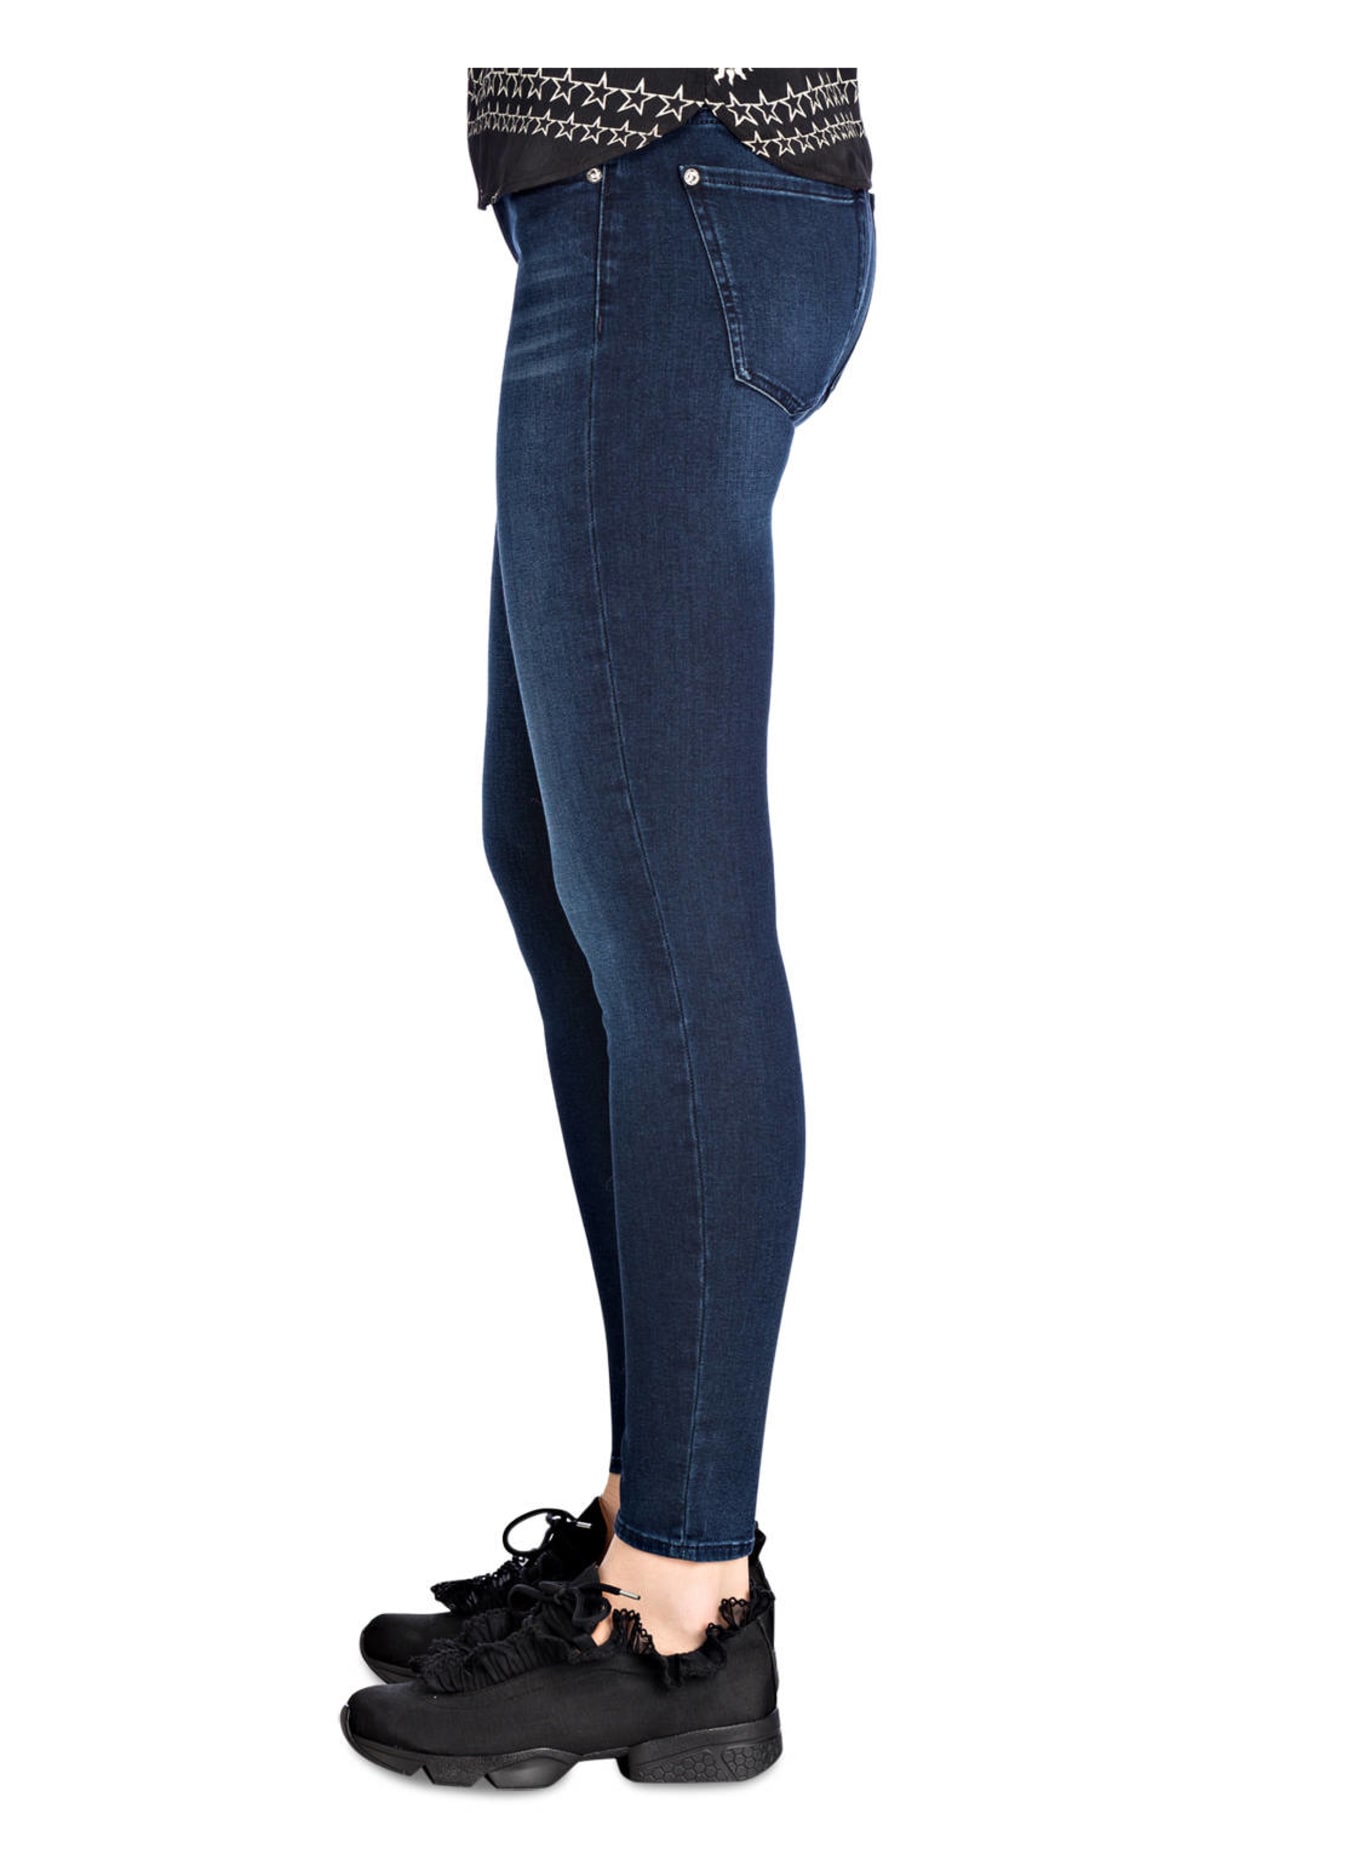 7 for all mankind Cropped-Jeans THE SKINNY CROP, Farbe: UF BAIR PARK AVENUE DARKBLUE (Bild 4)